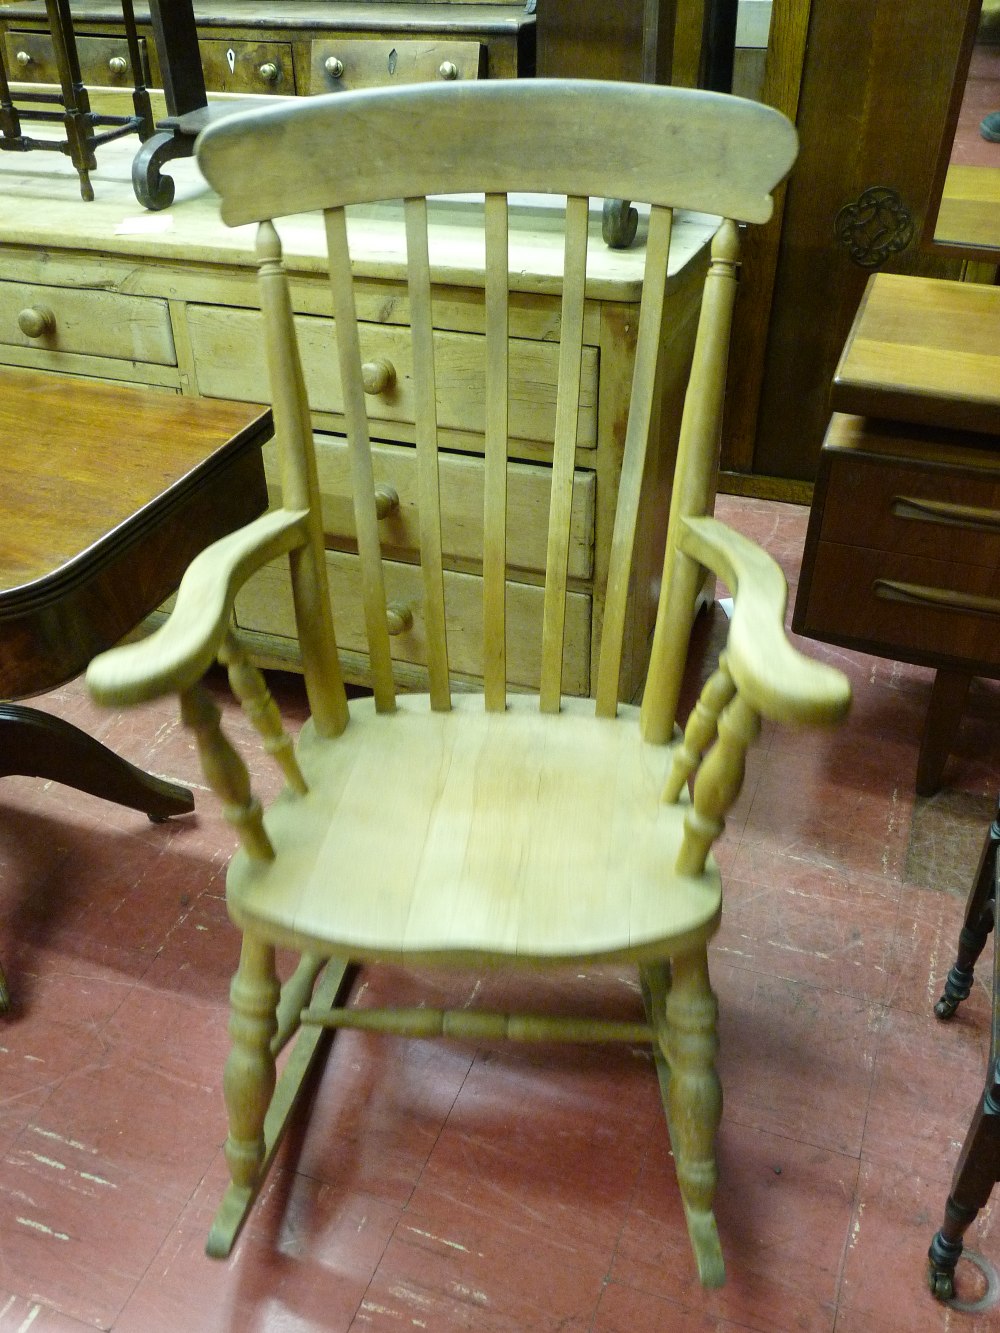 AN ANTIQUE STYLE FARMHOUSE ROCKING CHAIR with slatted back and turned arm and lower supports